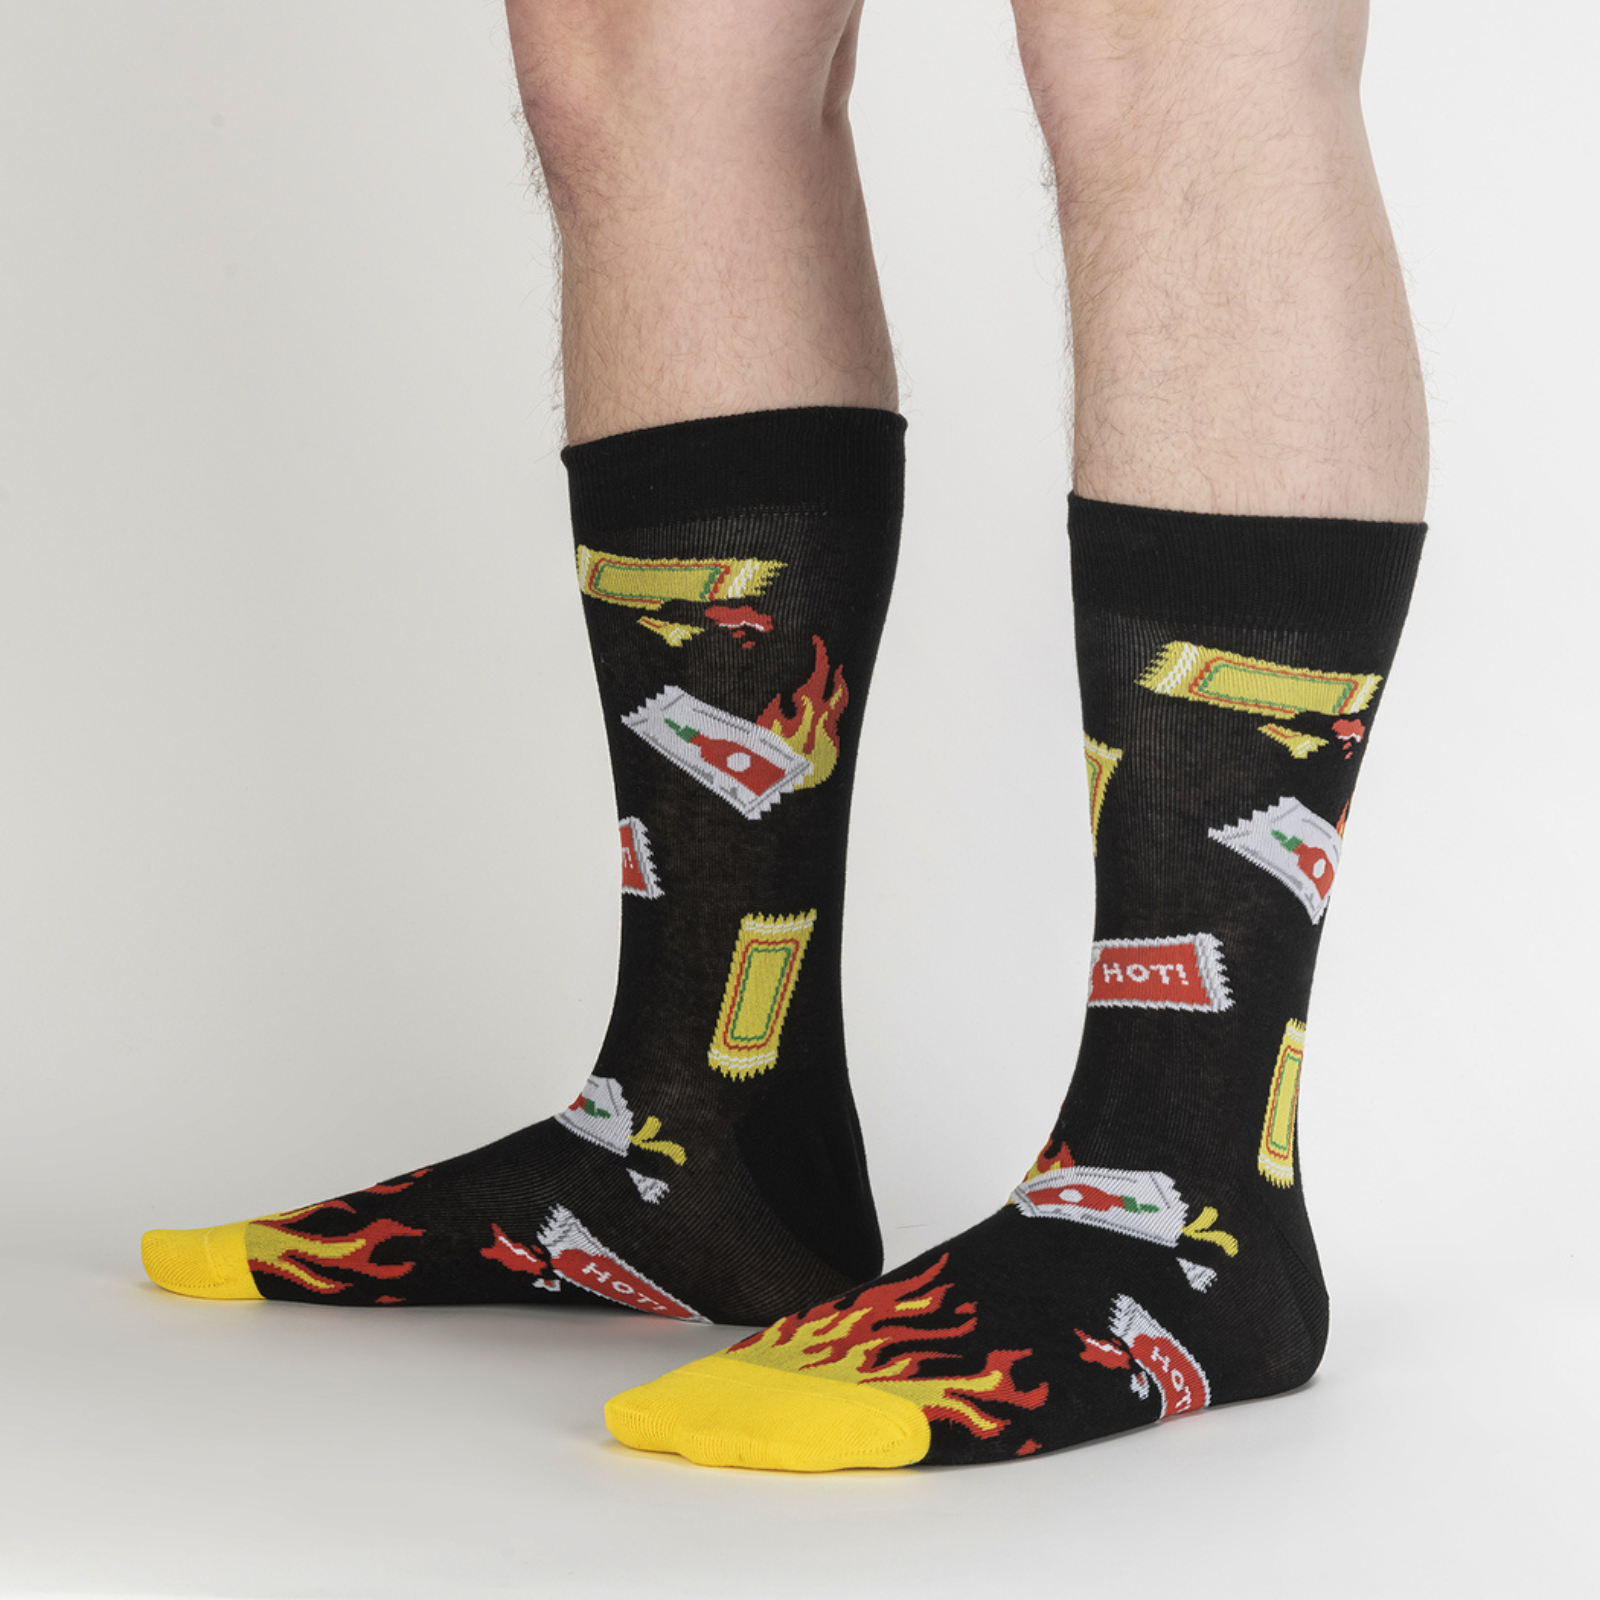 Sock It To Me Extra Hot men's sock featuring black crew sock with hot sauce packets and flames at toes worn by model seen from side